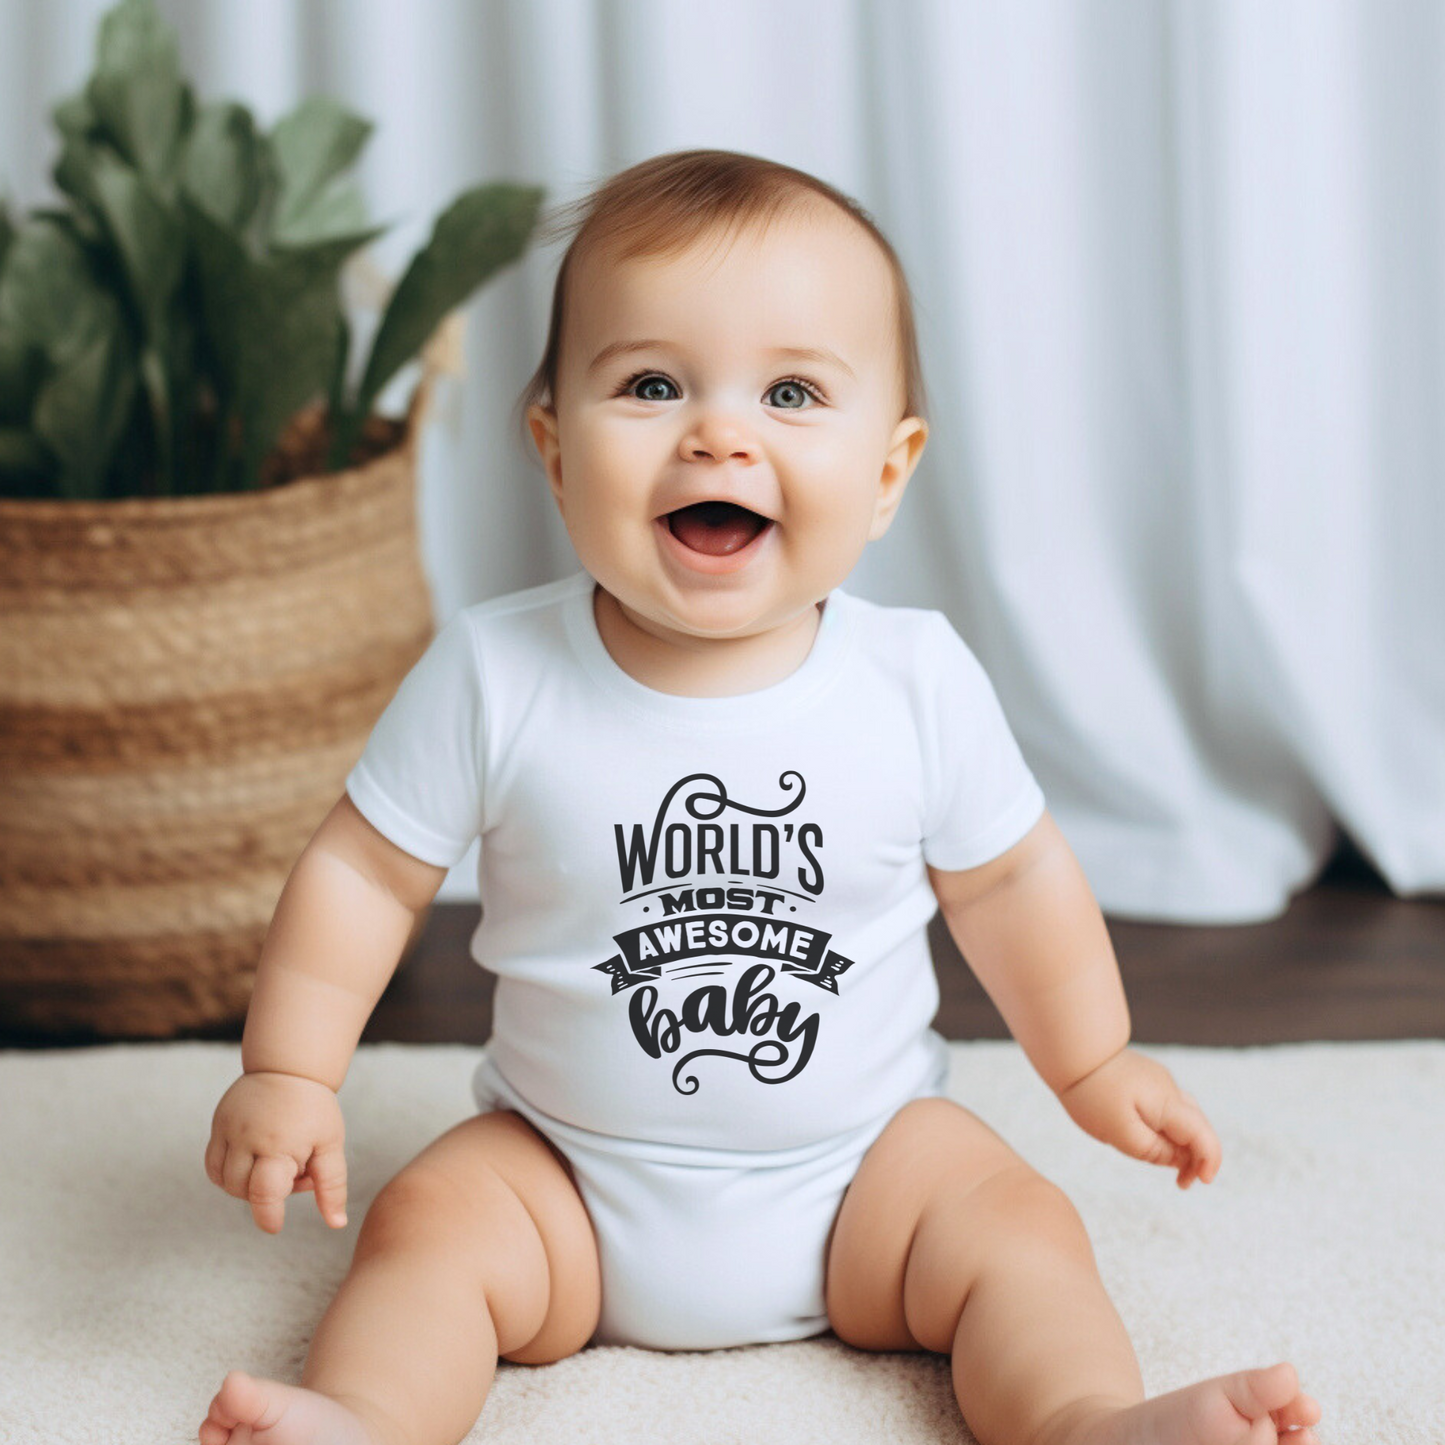 World's Most Awesome Mom & Baby Matching Sets